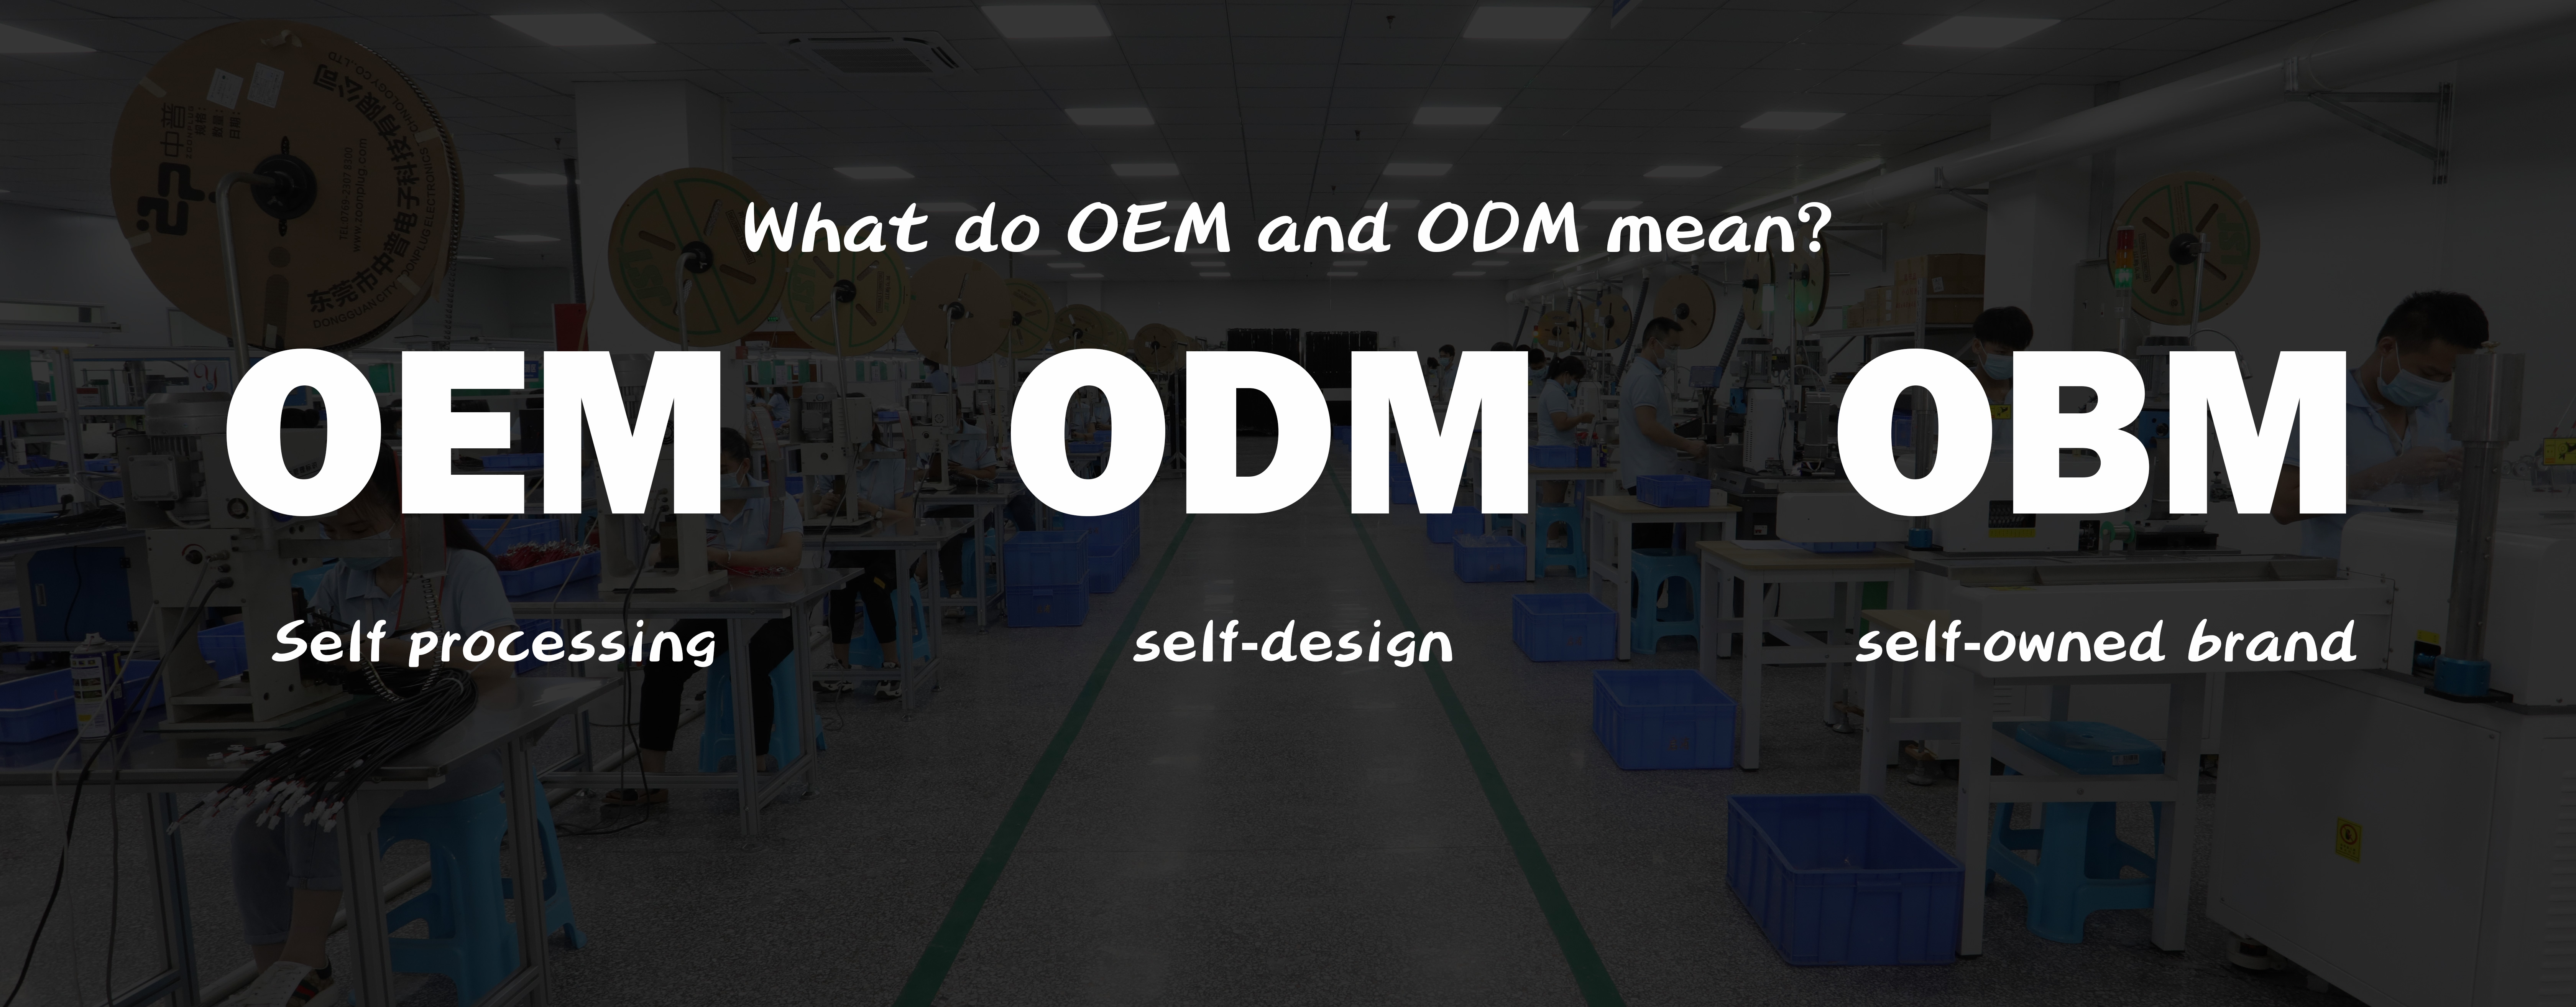 What do OEM and ODM mean?